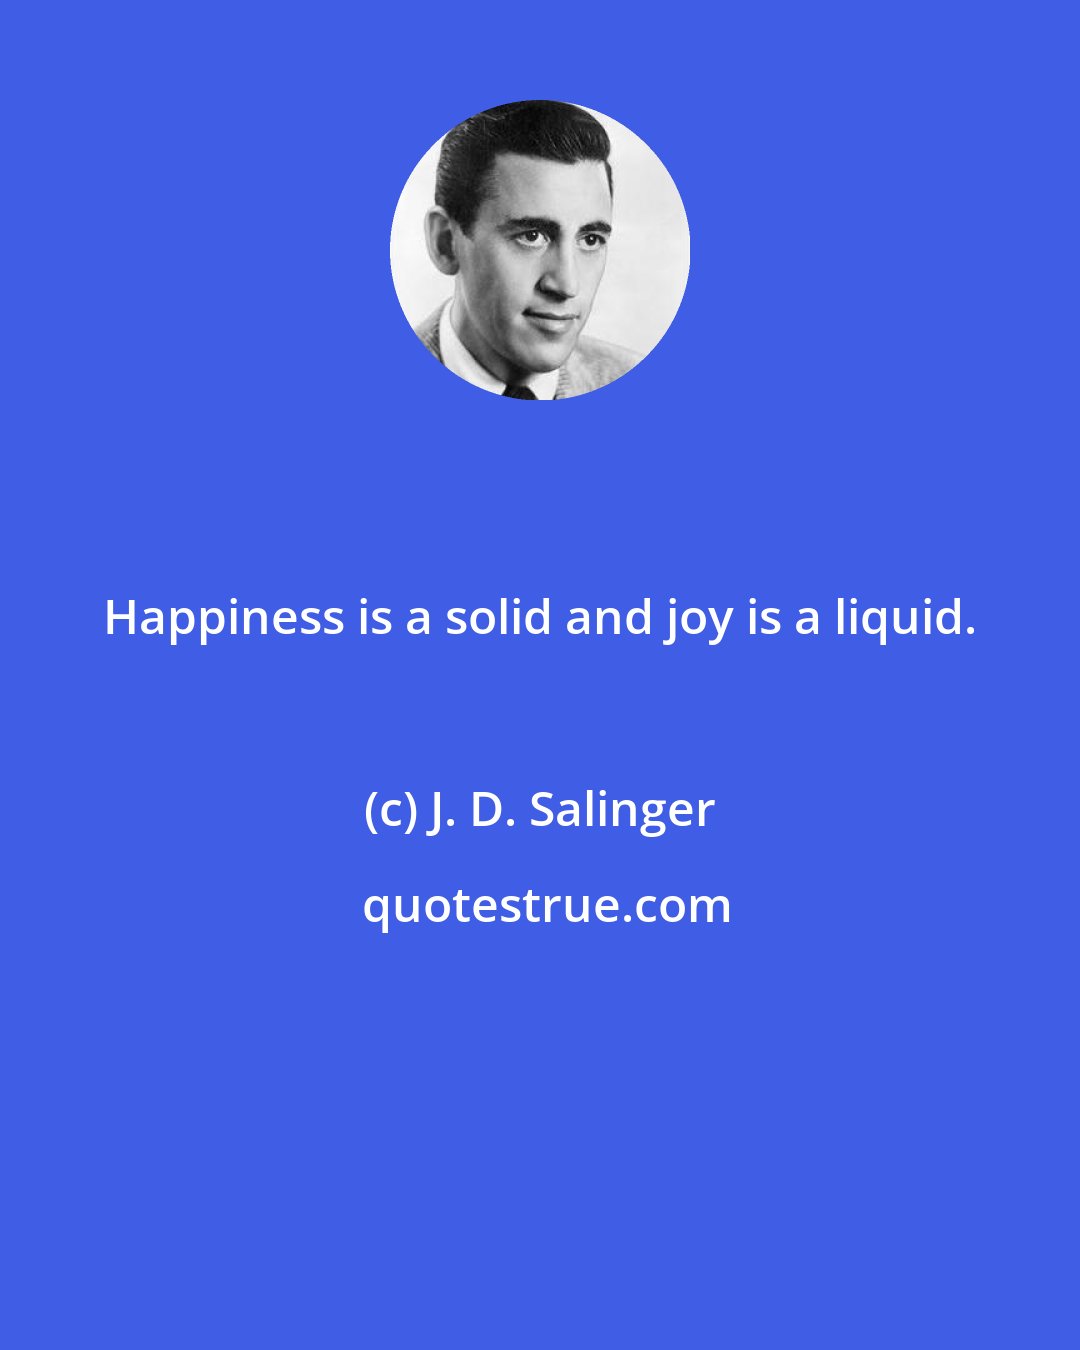 J. D. Salinger: Happiness is a solid and joy is a liquid.